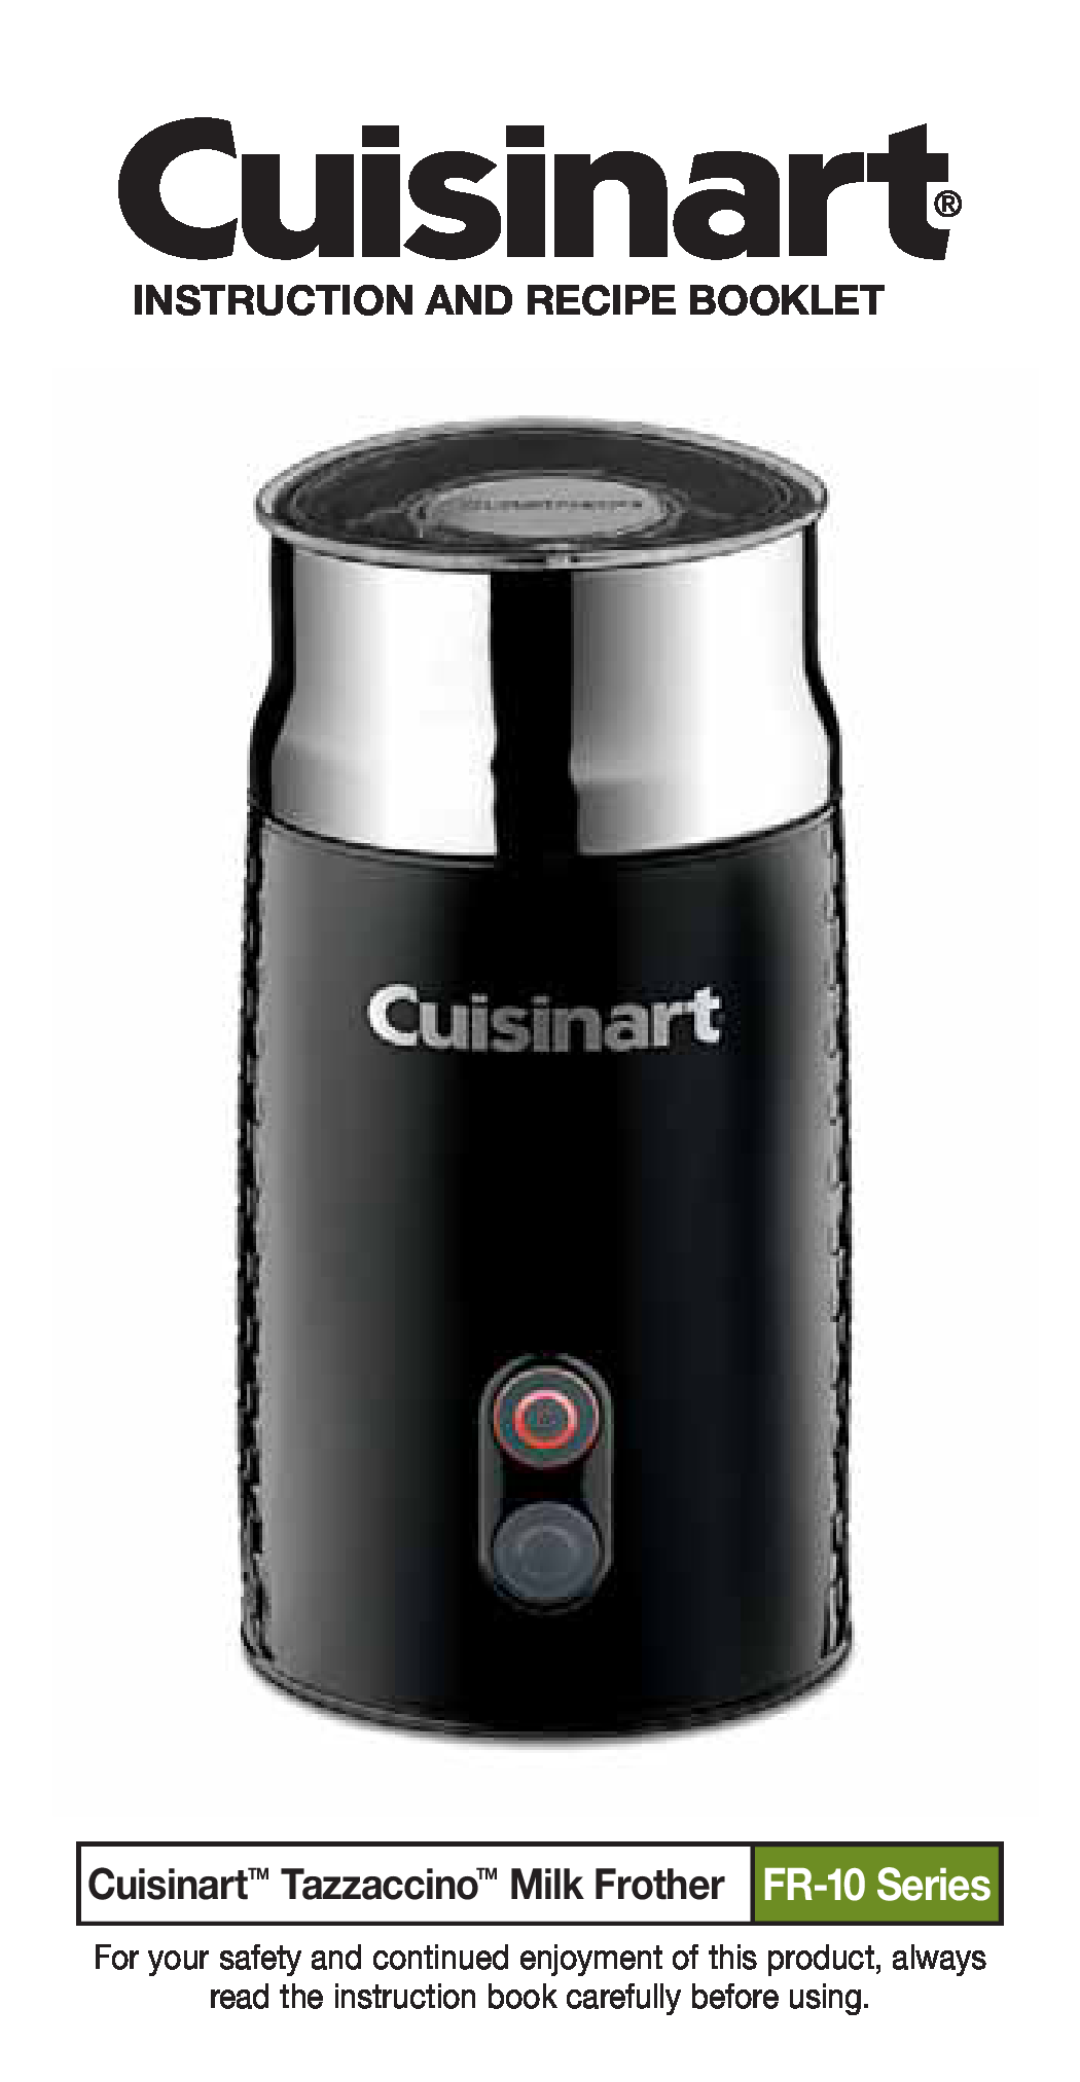 Cuisinart manual CuisinartTM TazzaccinoTM Milk Frother, FR-10 Series, Instruction And Recipe Booklet 